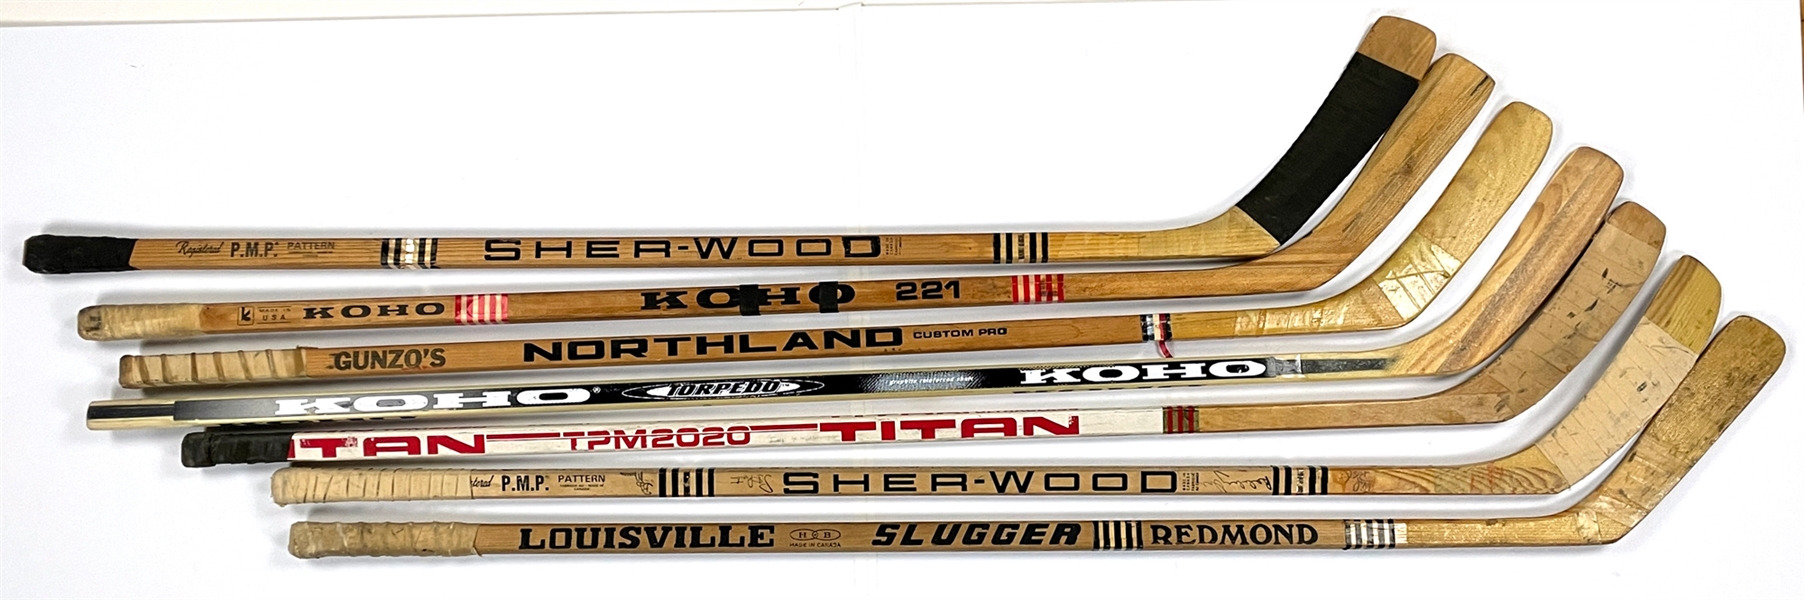 Chicago Blackhawks Game Used Stick Collection of 13 Incl. Tony Amonte, Dennis Hull and Others